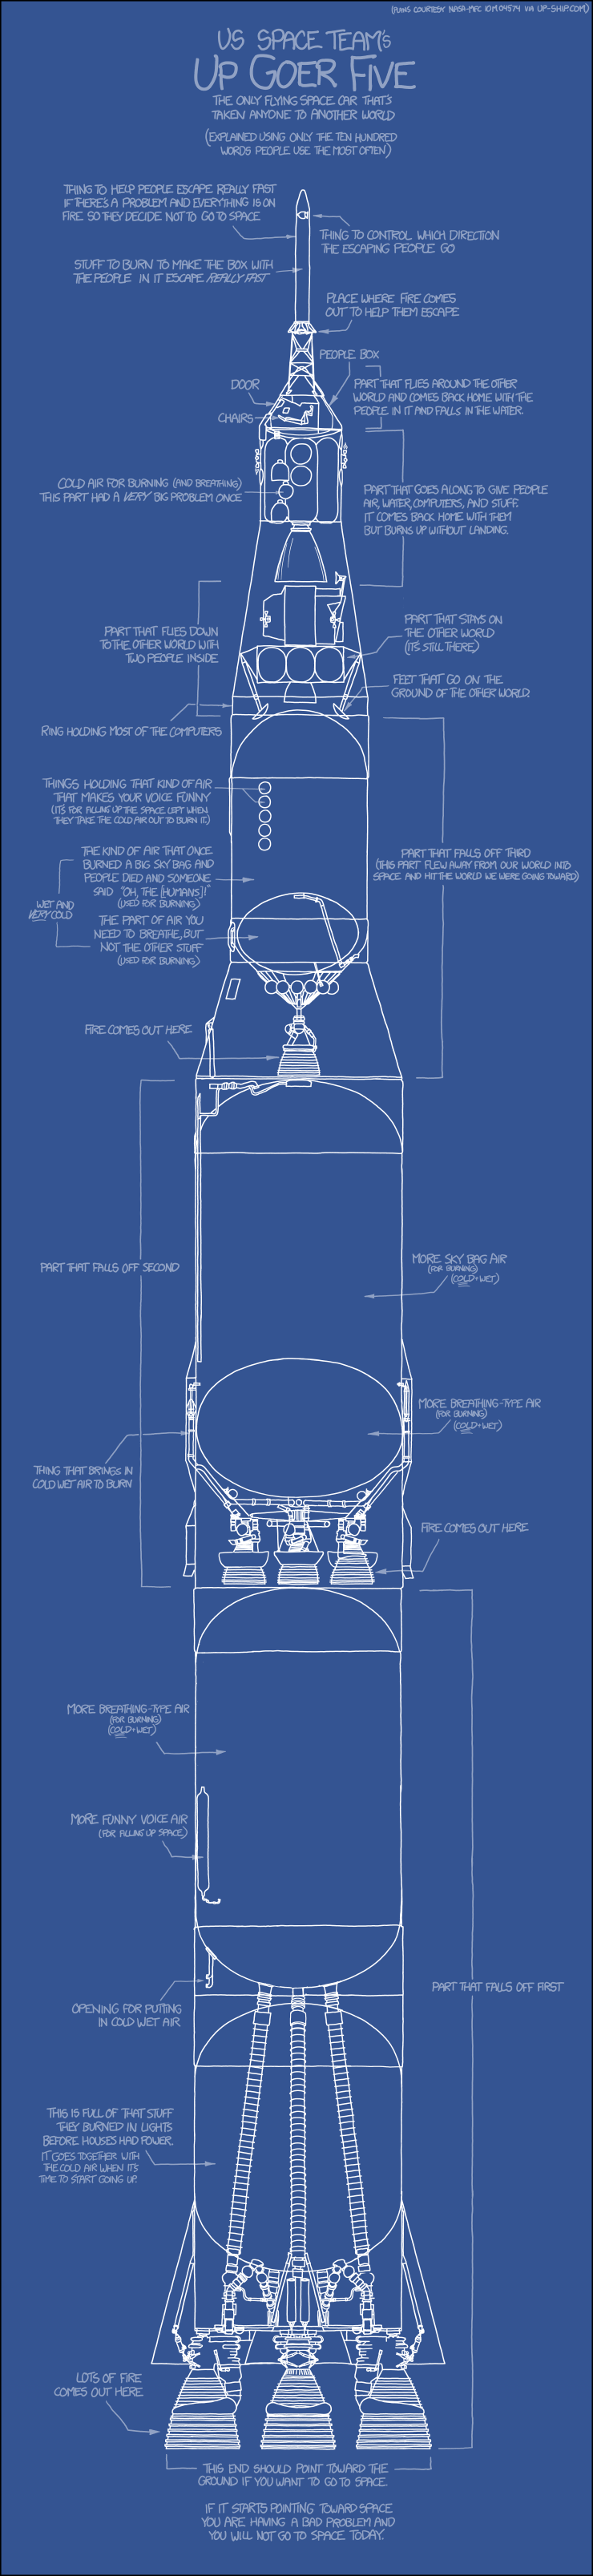 Blueprint of rocket, labeled using silly-sounding simplistic language such as "fire comes out here"